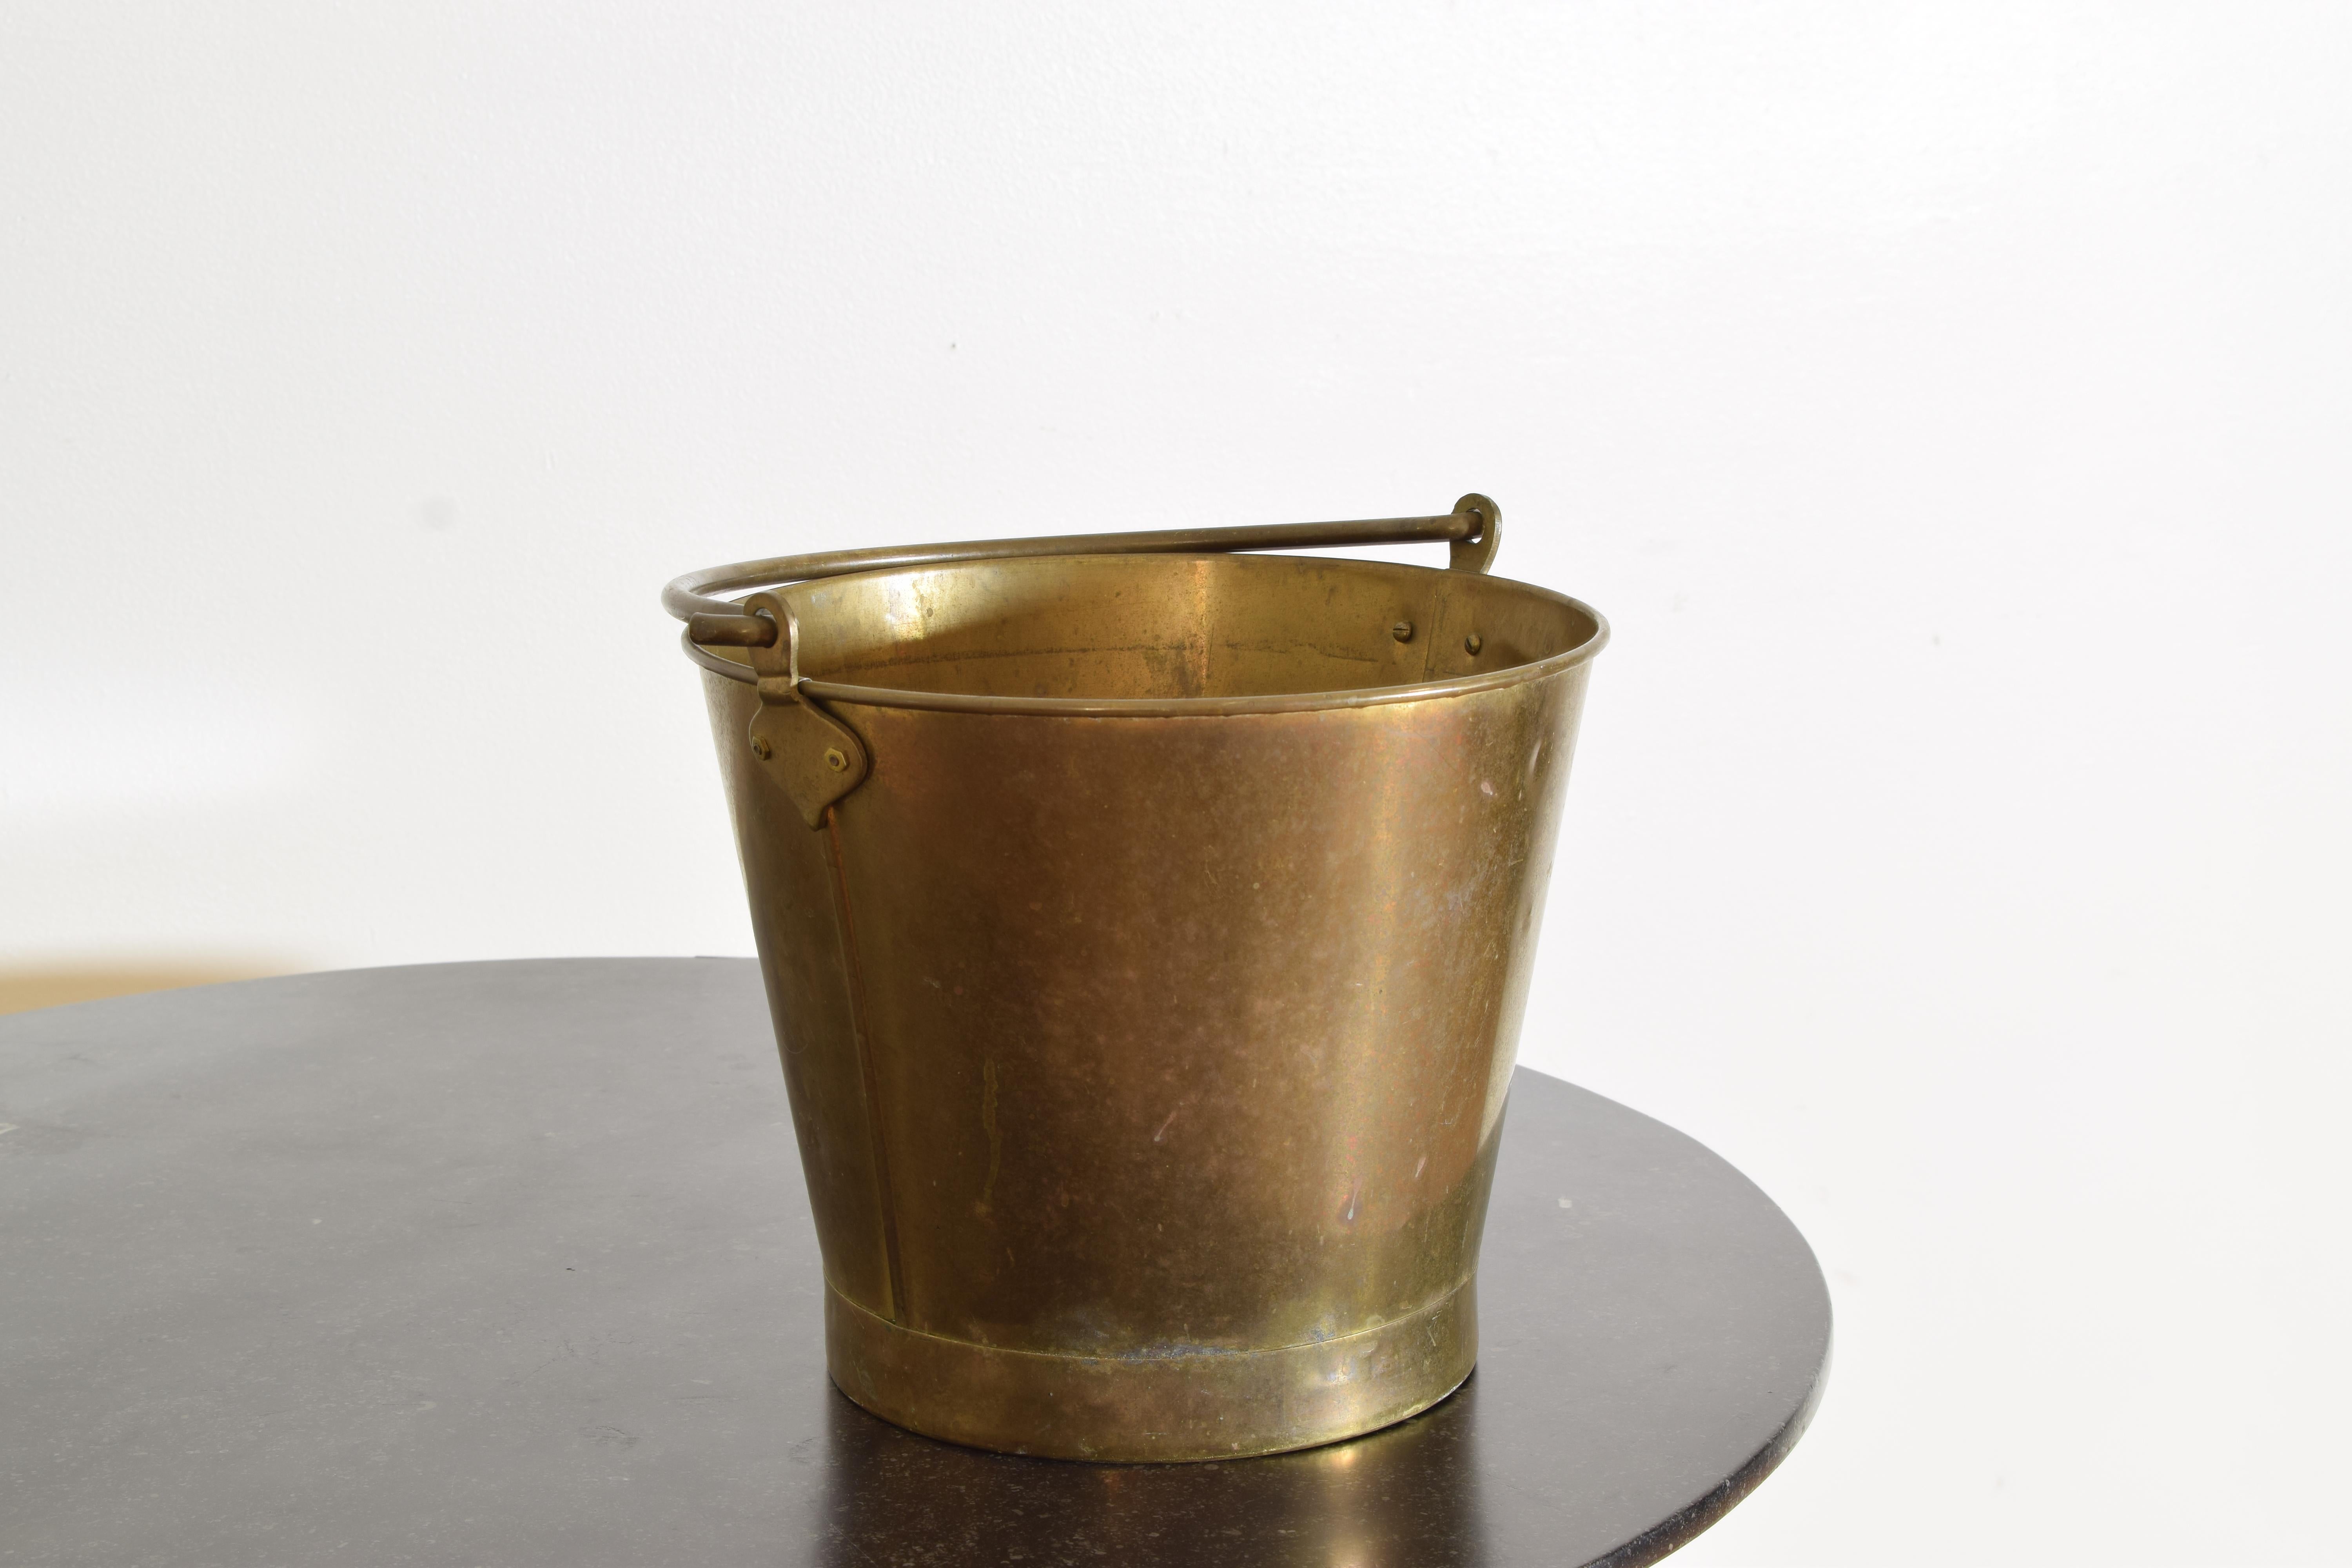 Rustic Large Hand Hammered Brass Bucket with Handle. Can Carry Water or be used as a planter. It is in good vintage condition and has a beautiful patina.

